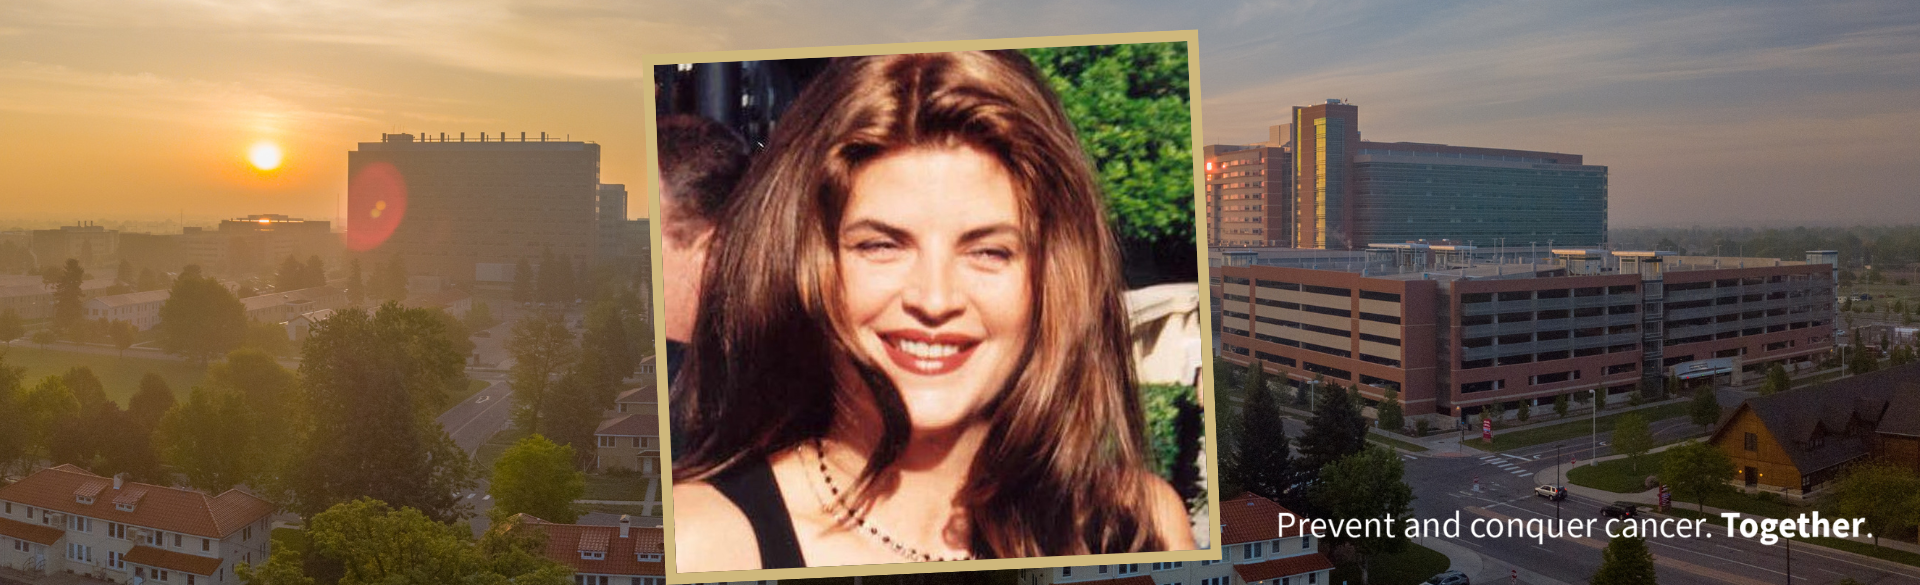 Actress Kirstie Alley, died from colon cancer after a short battle with the disease.